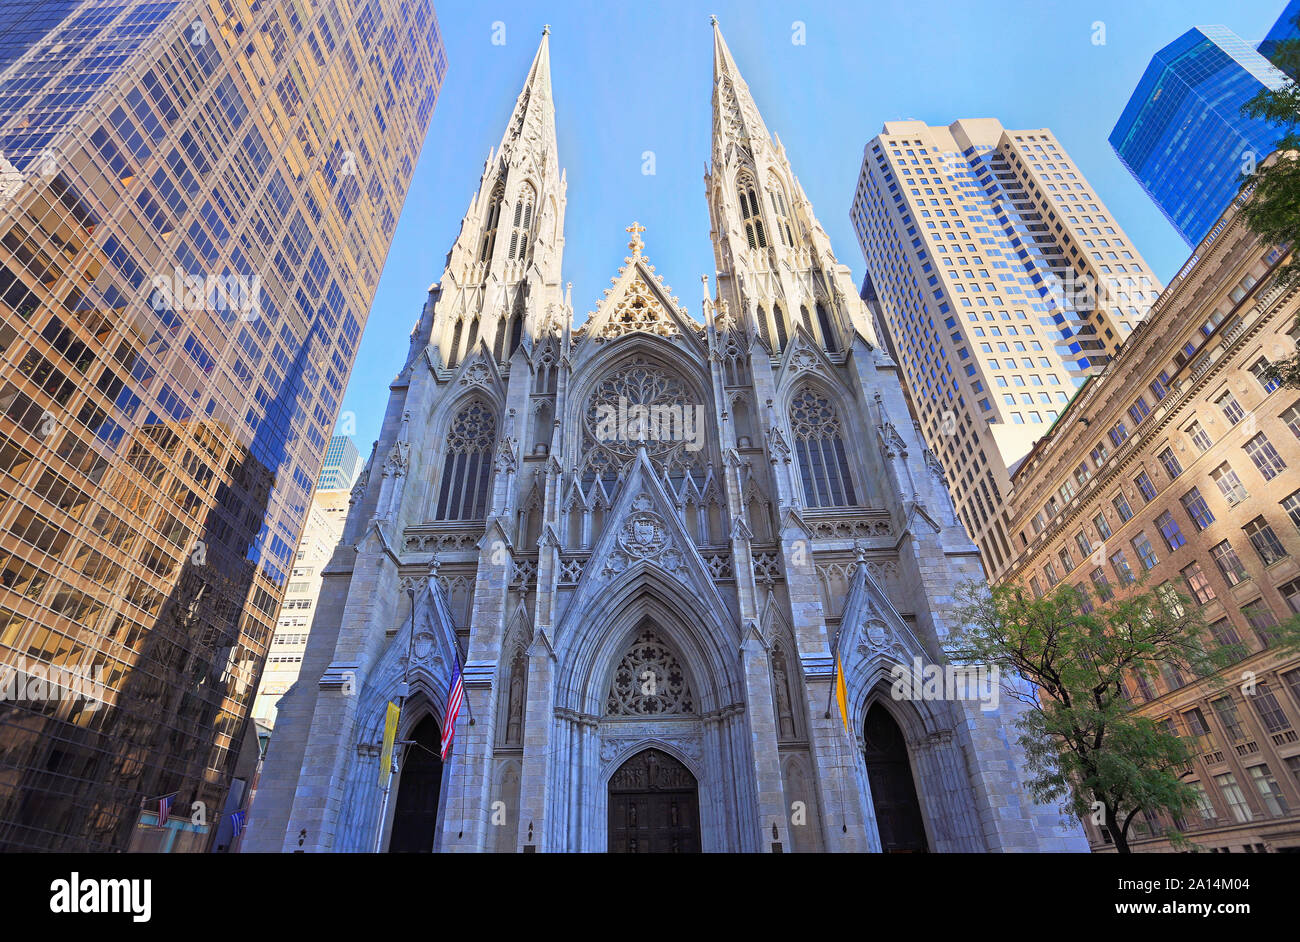 St. Patrick's Cathedral exterior view in New York City Stock Photo